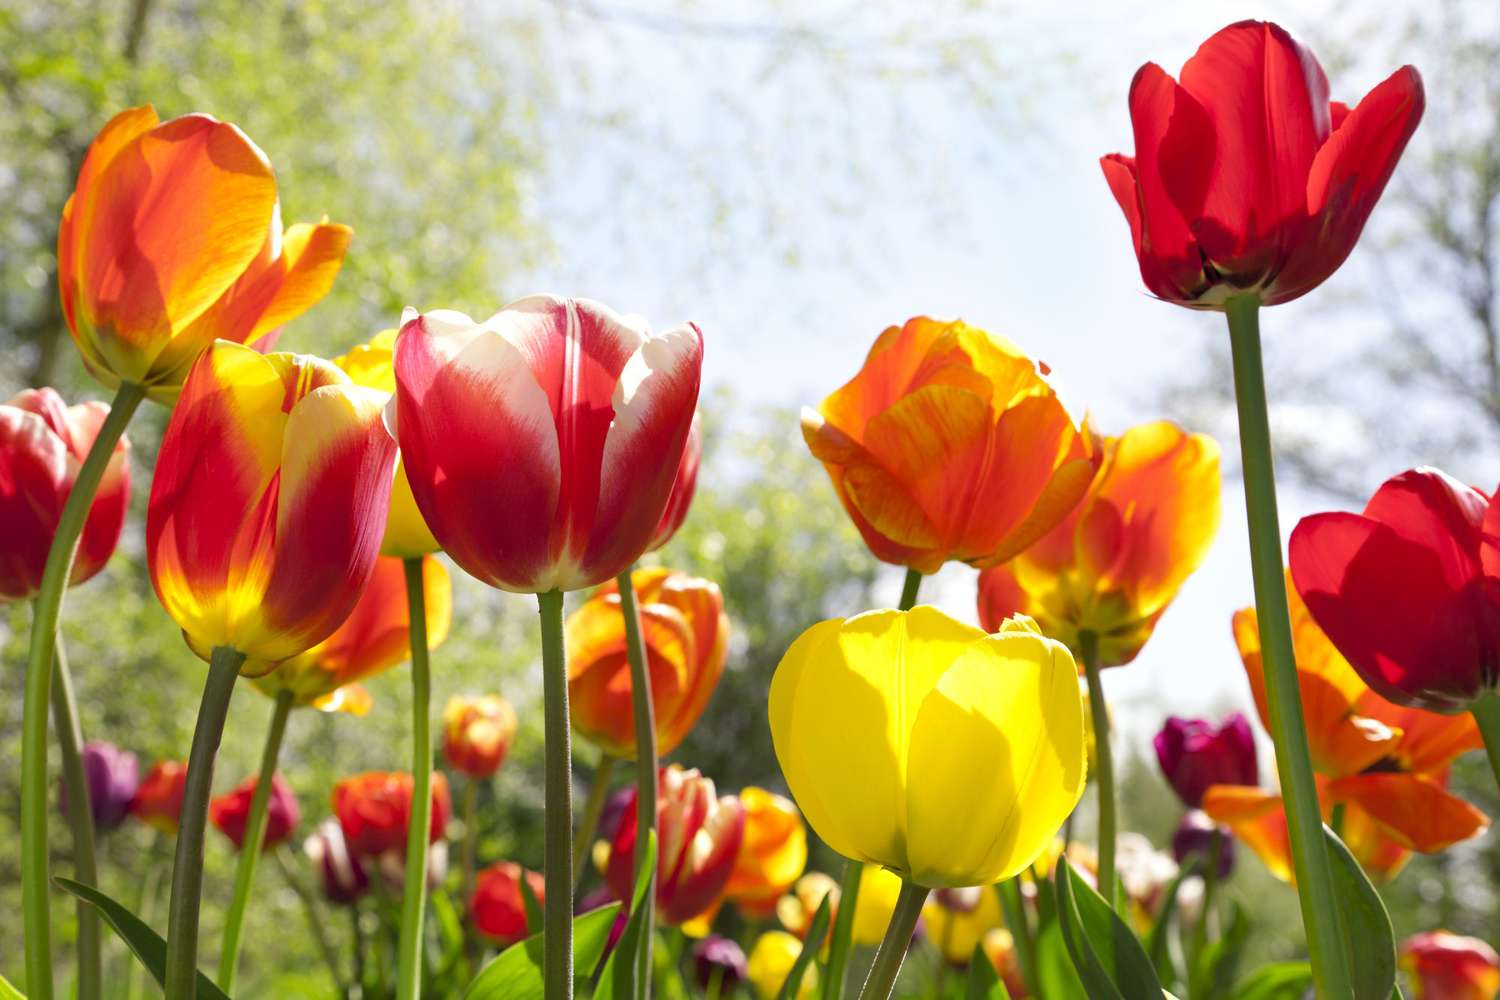 Are Tulips Perennials? Here's Everything You Need to Know About the Pretty Spring Flowers, Including How Long They Last